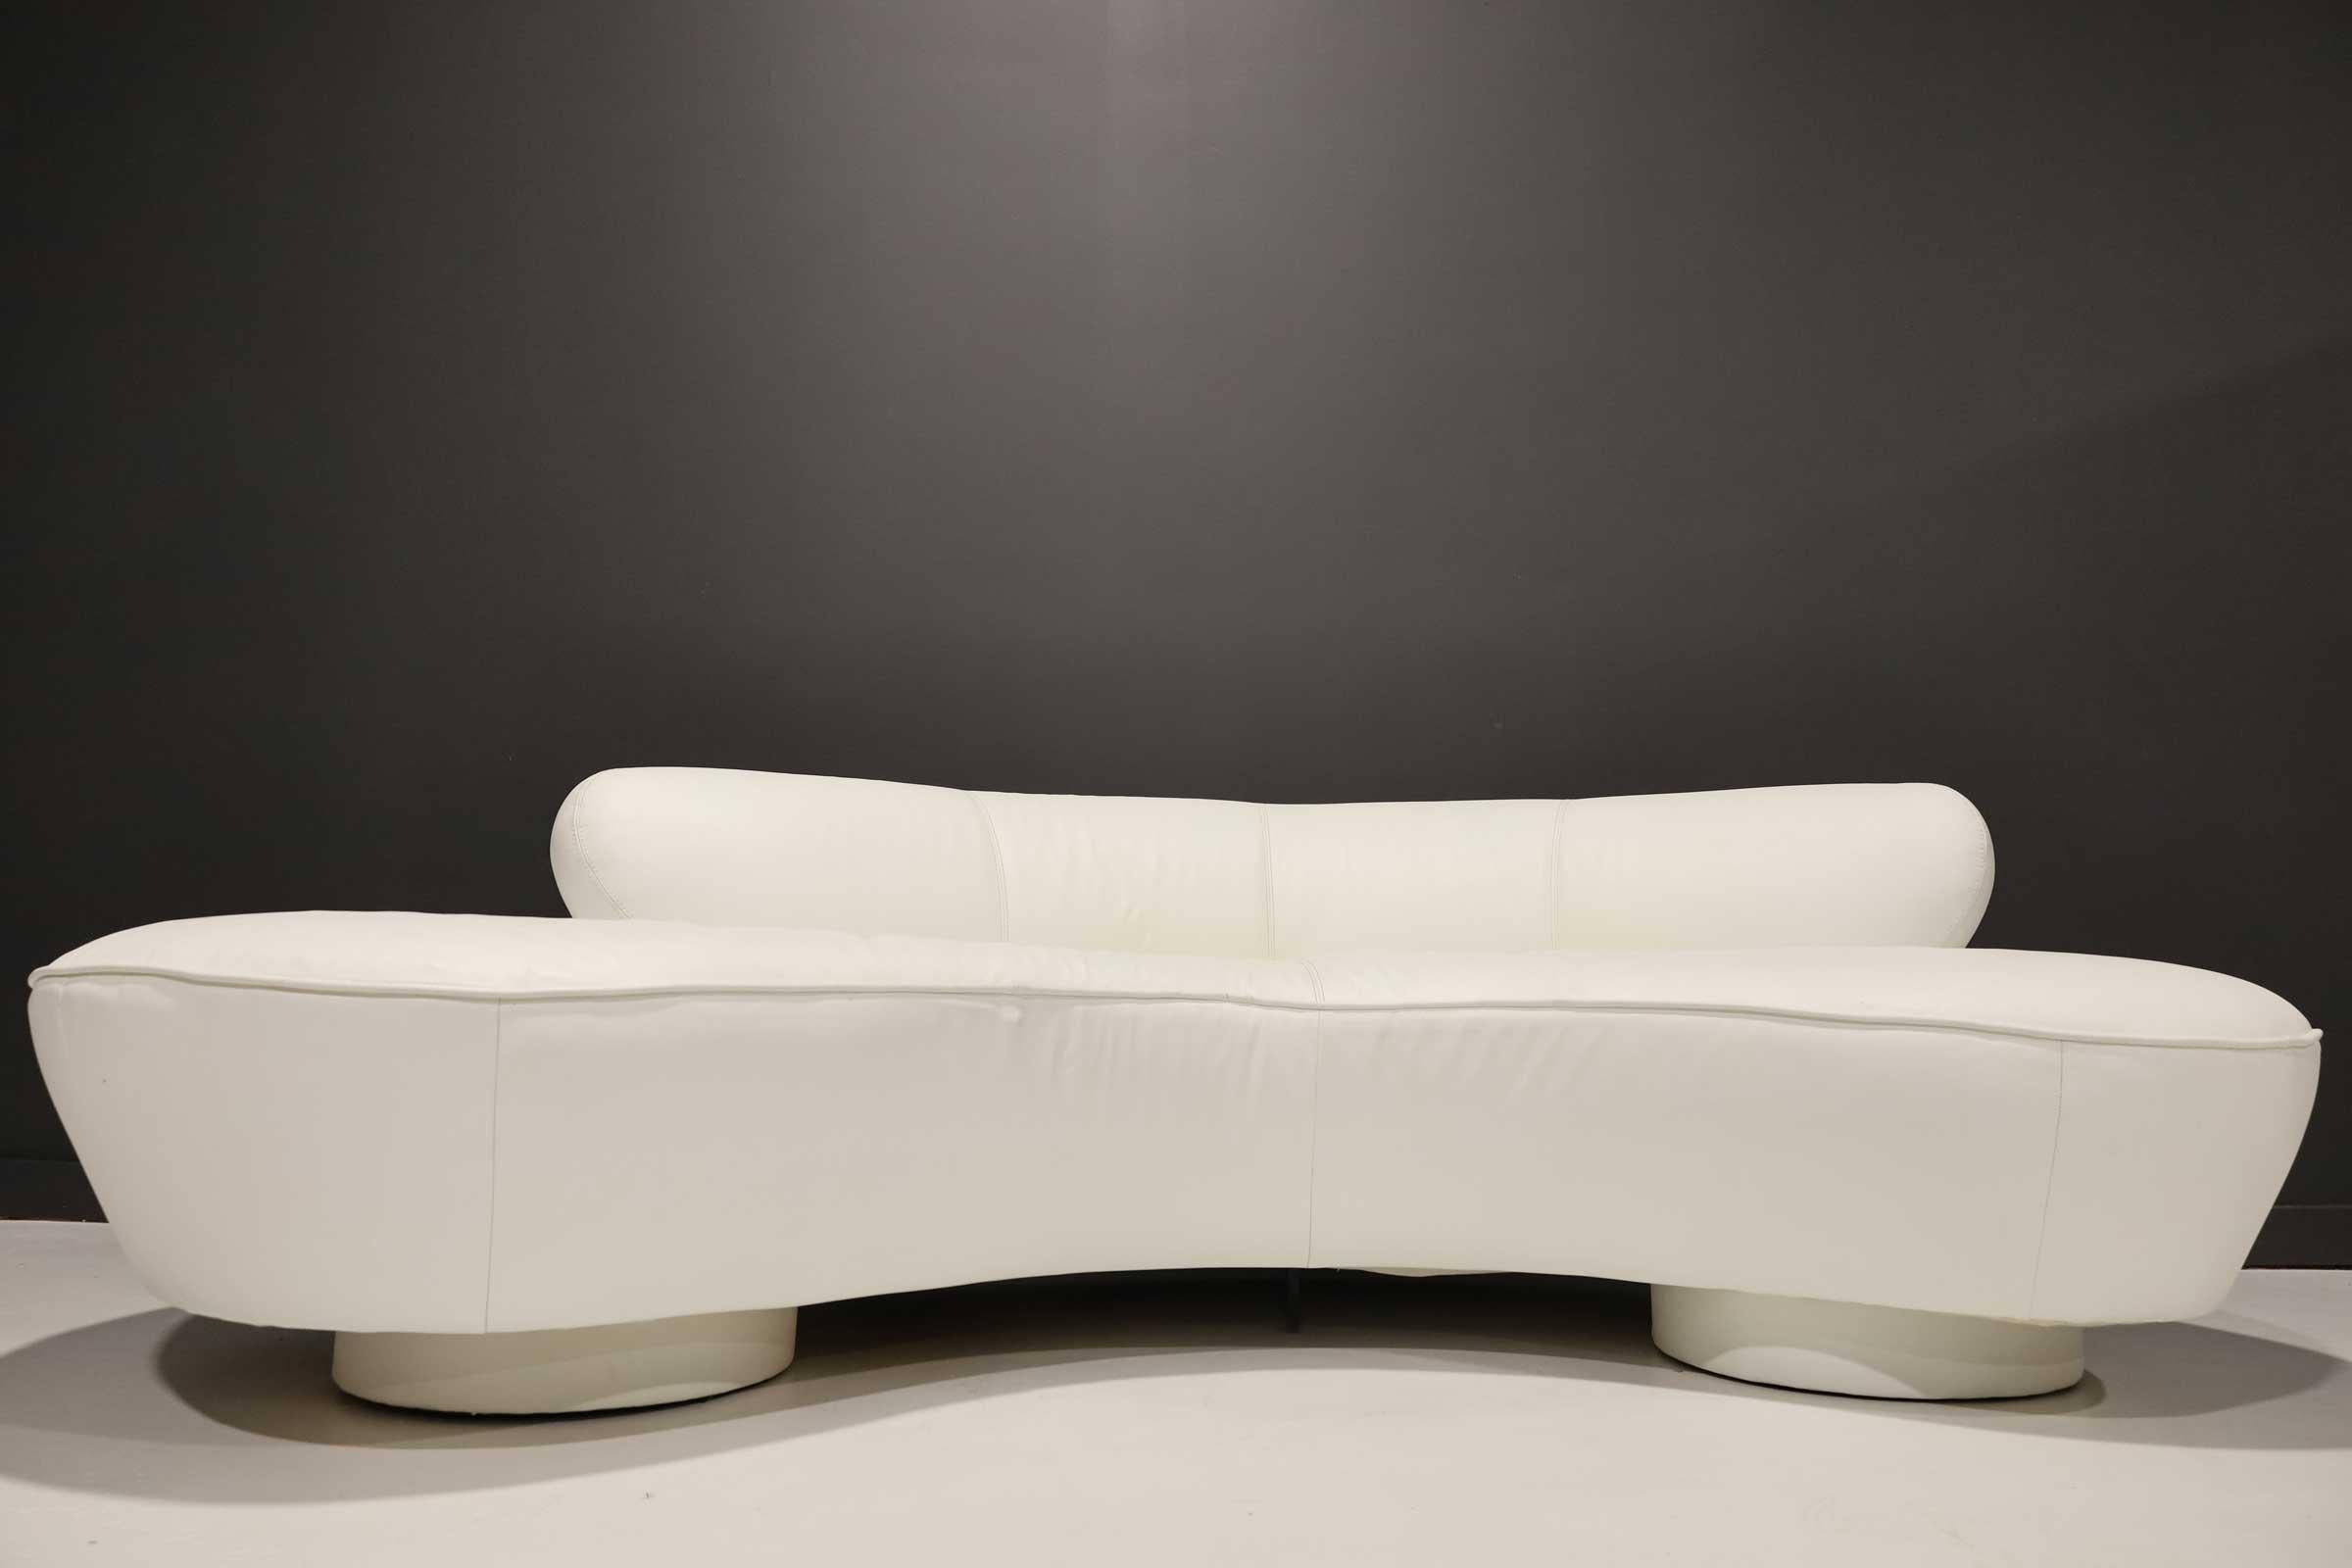 Vladimir Kagan's iconic cloud serpentine sofa by Directional. This sofa is upholstered in white leather. We have another Kagan cloud if you wanted a pair of opposing sofas. They would both need to be reupholstered to match.